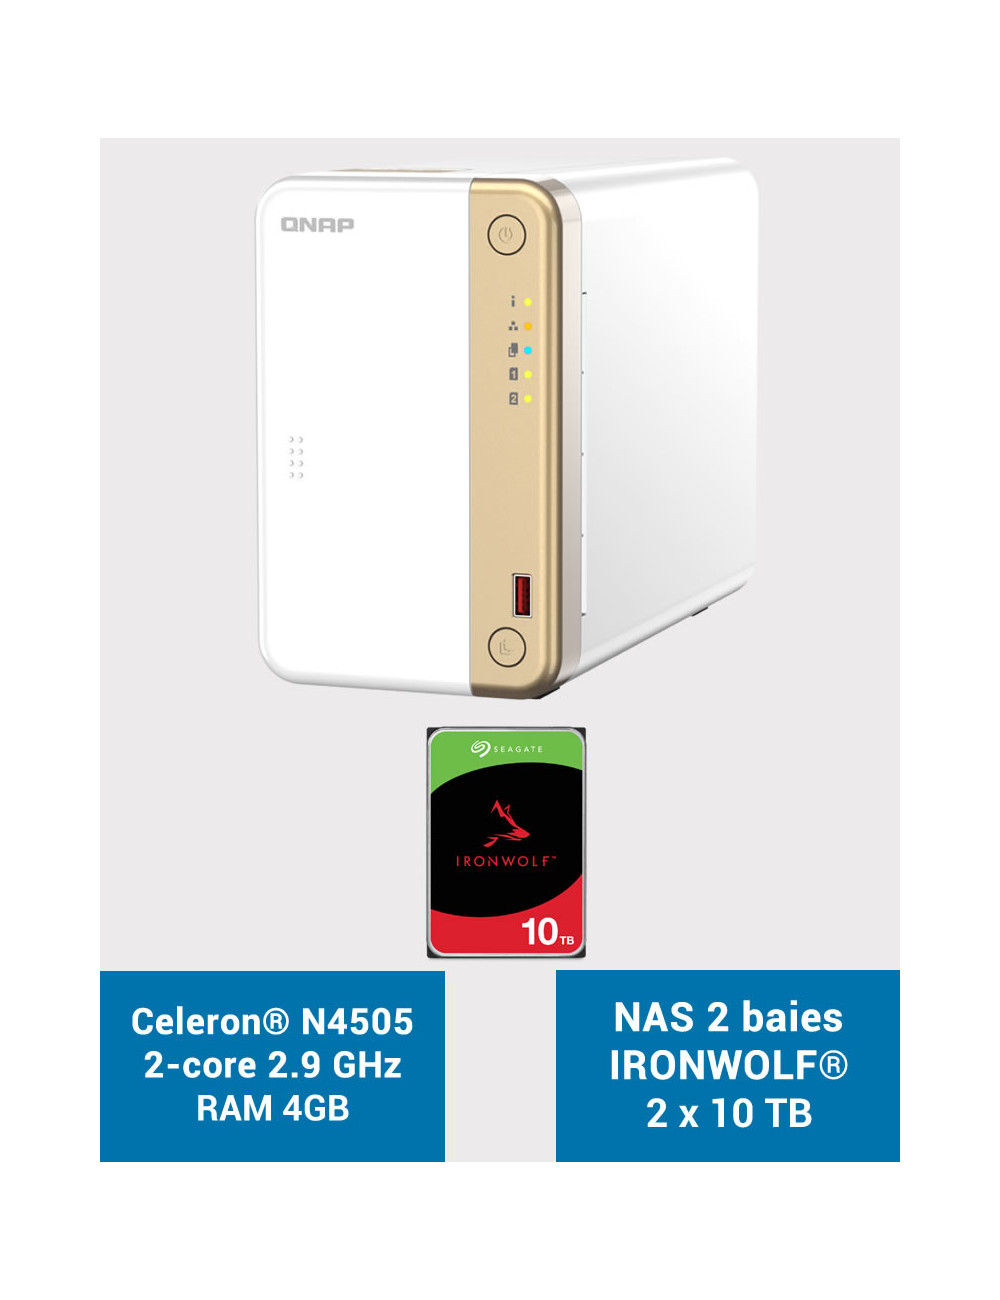 QNAP TS-262 4GB Serveur NAS IRONWOLF 20To (2x10To)